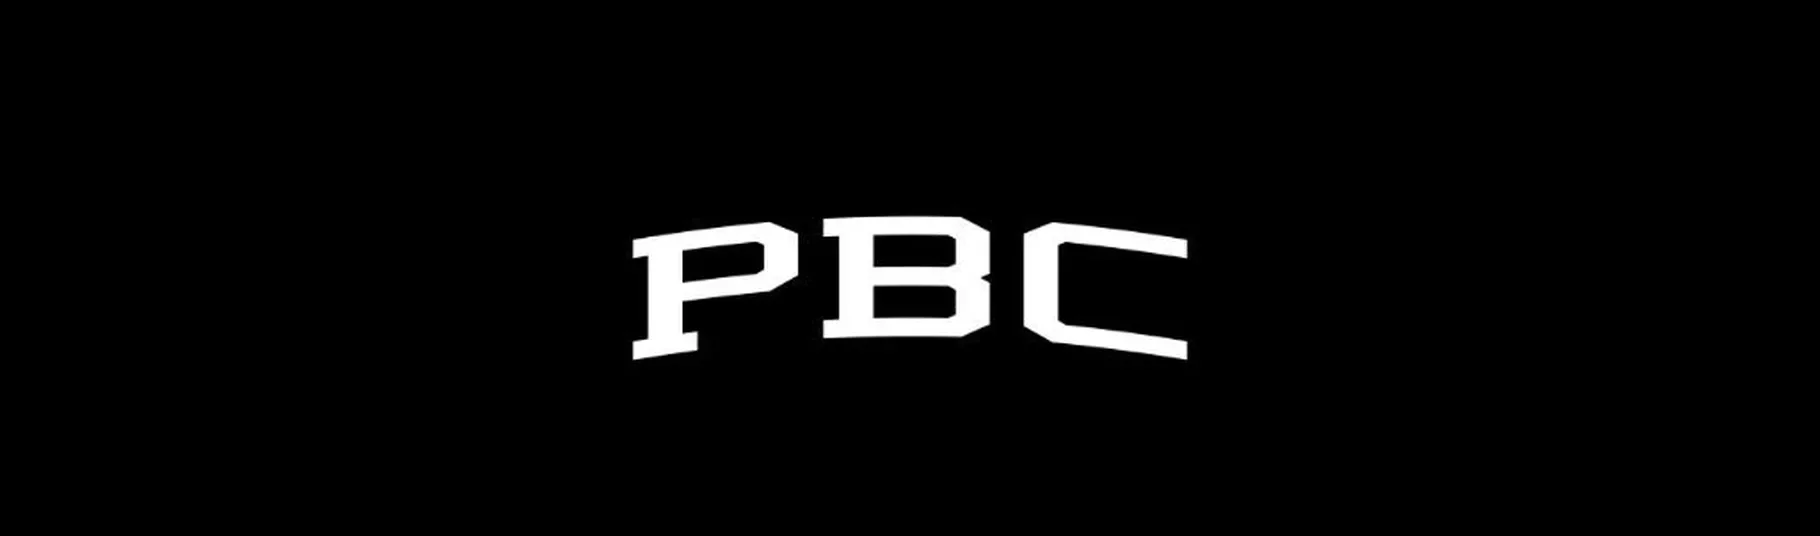 Breaking: PBC Announces A Multi-Year Deal With Amazon Prime